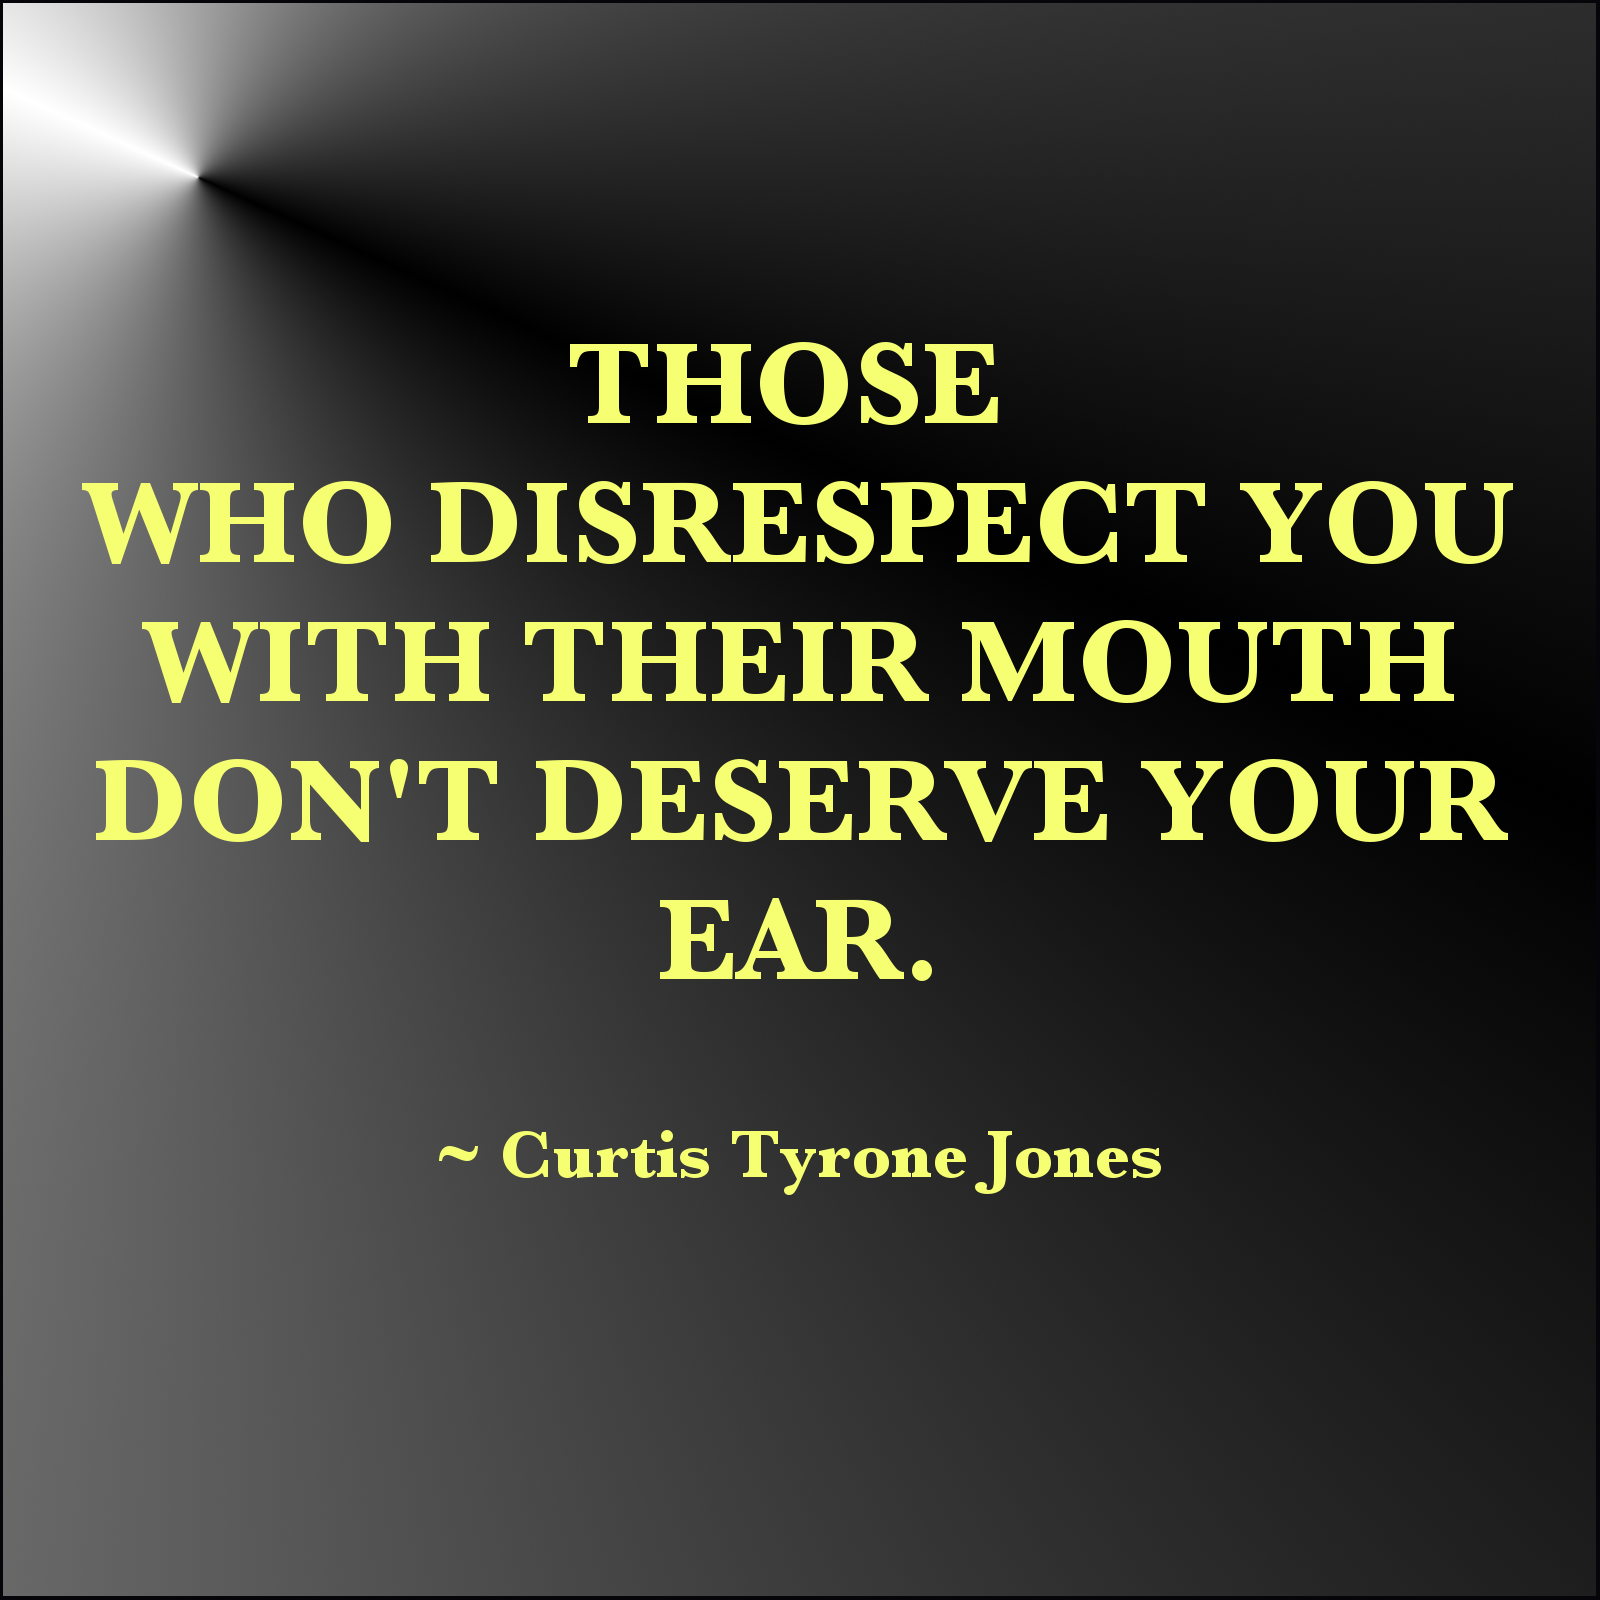  Famous  Quotes  About Self  Respect  QuotesGram